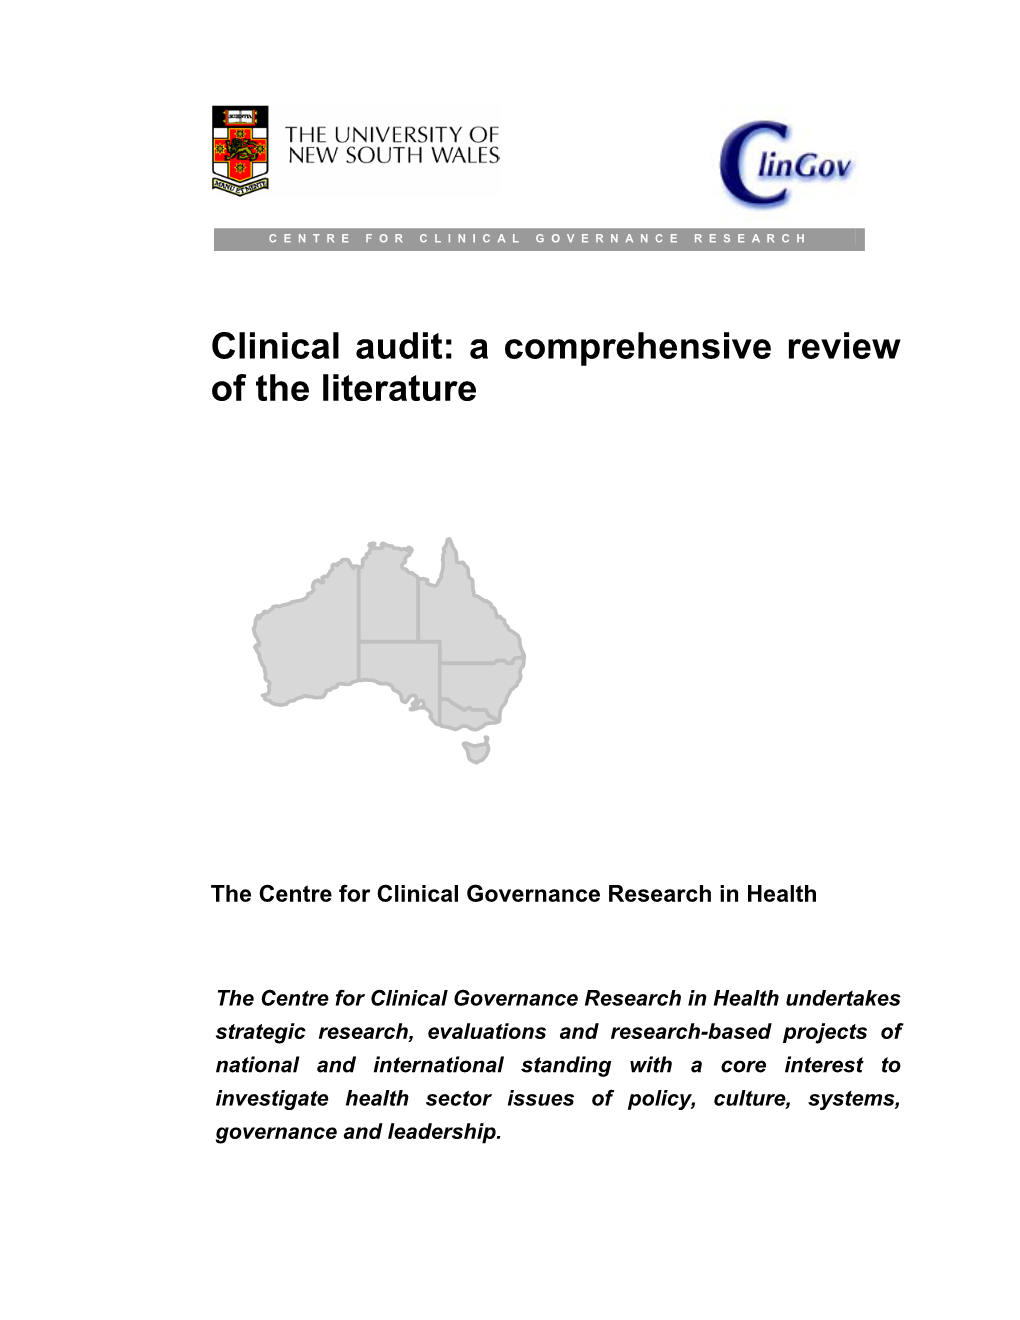 Clinical Audit: a Comprehensive Review of the Literature